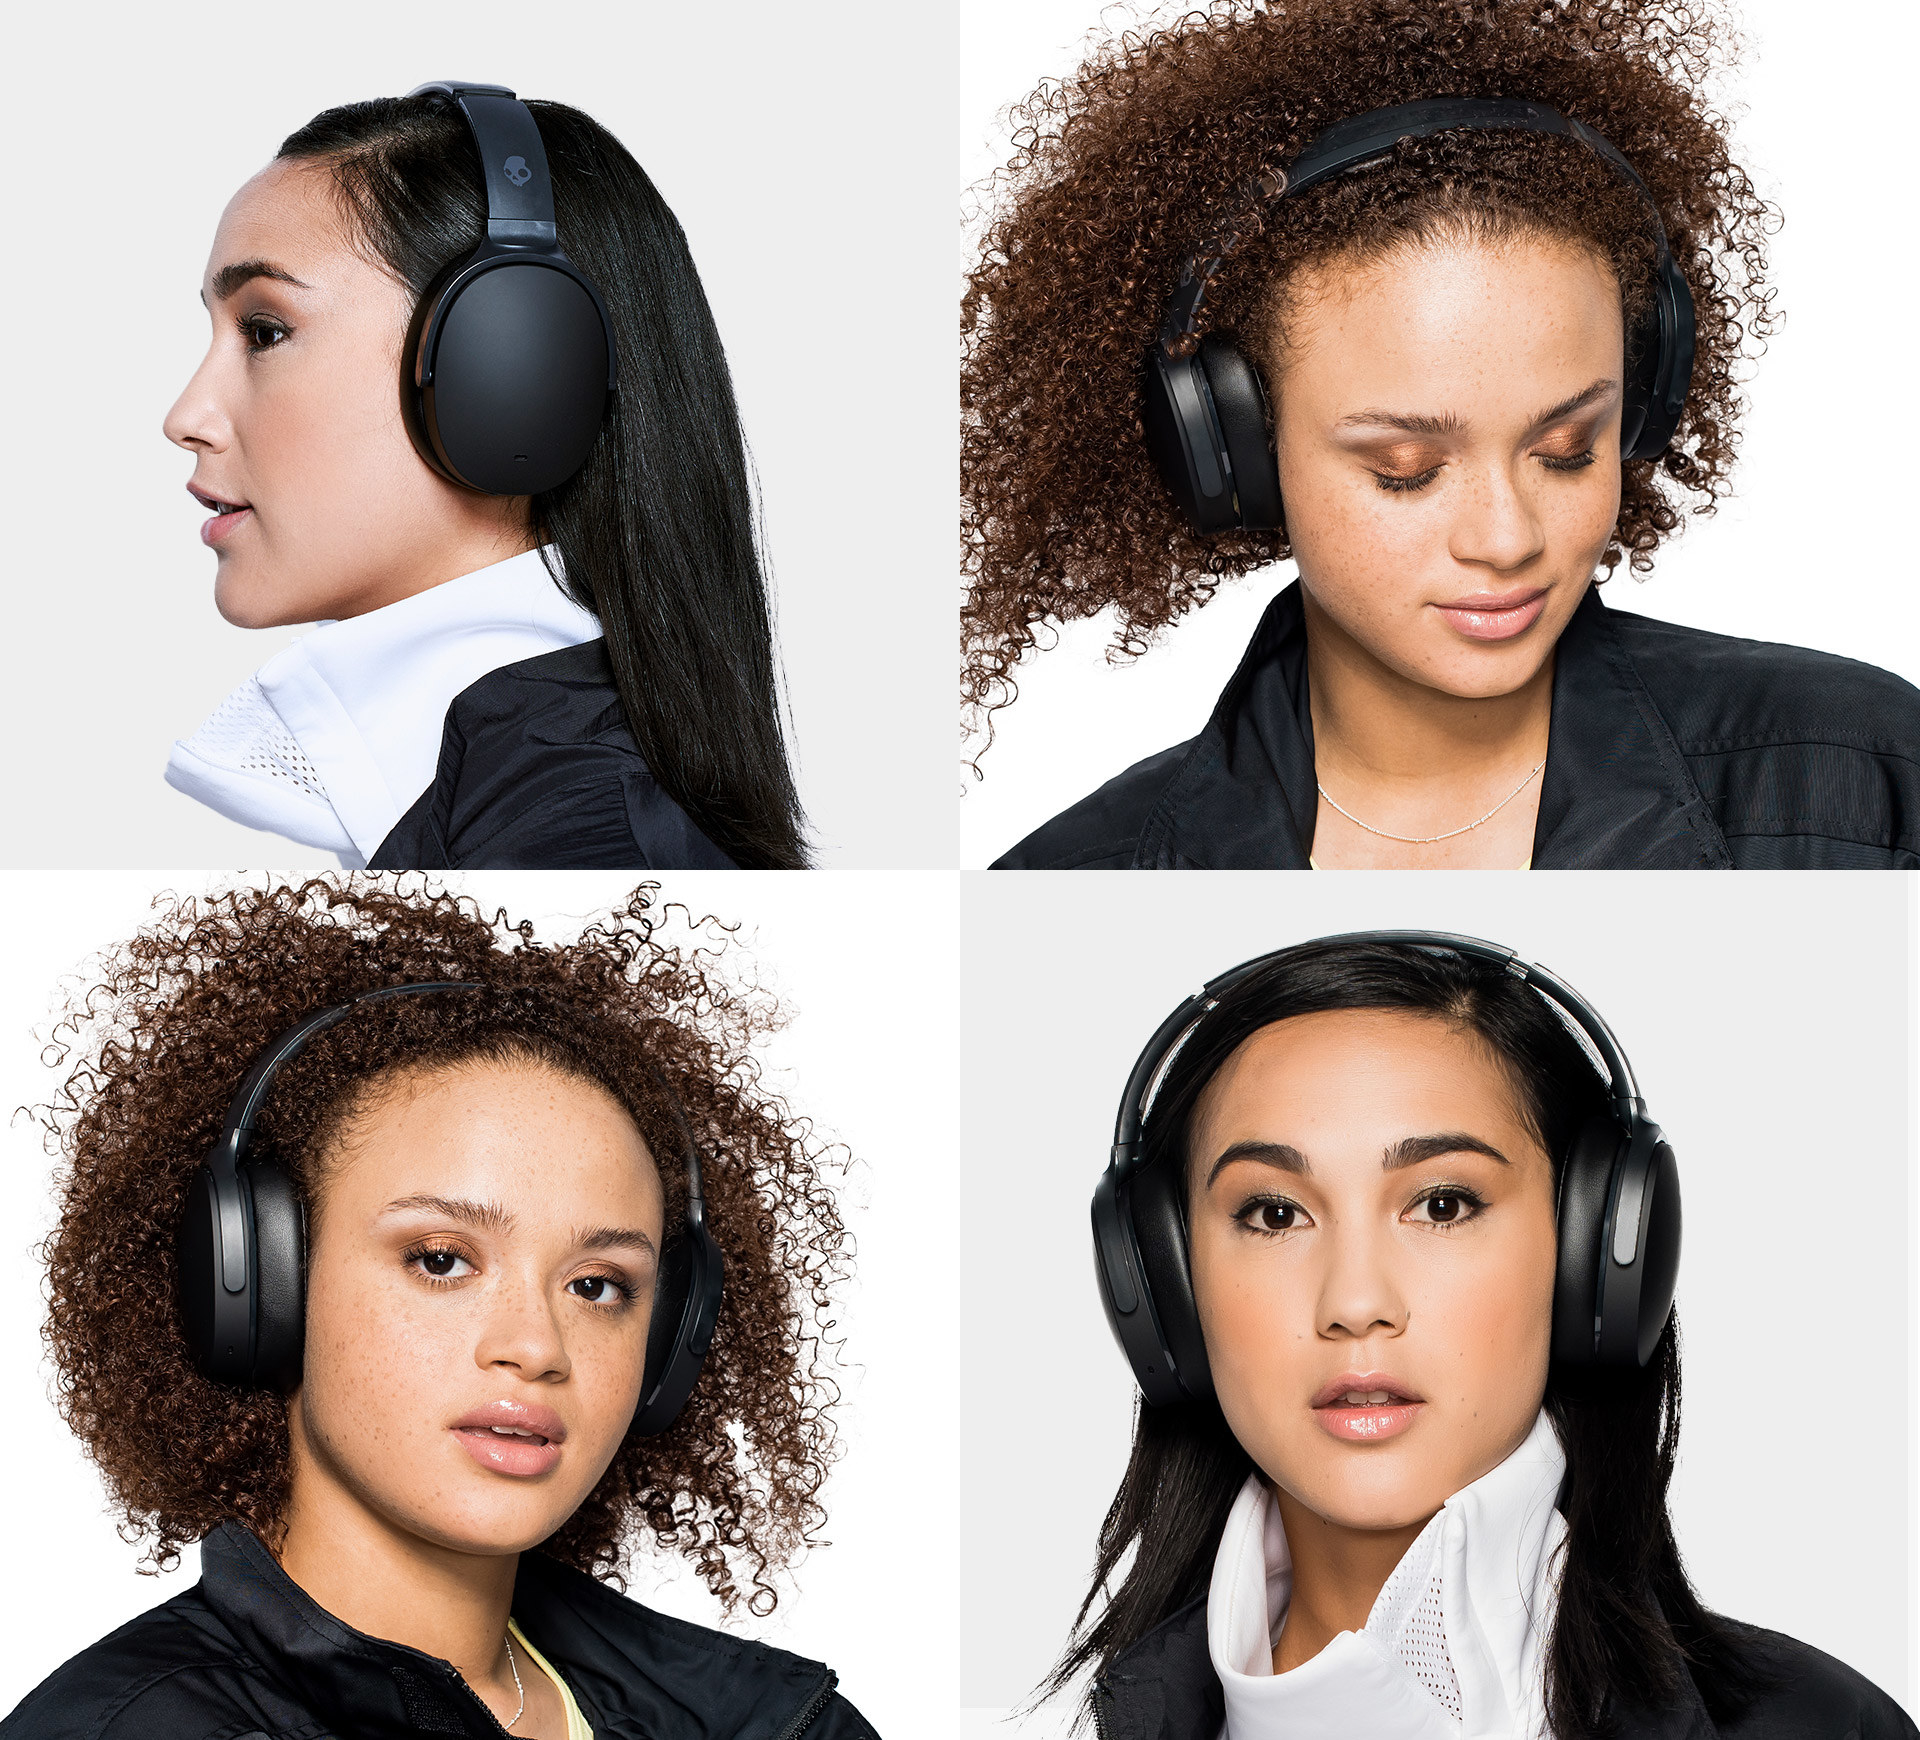 two people wearing the headphones in four different photo shots